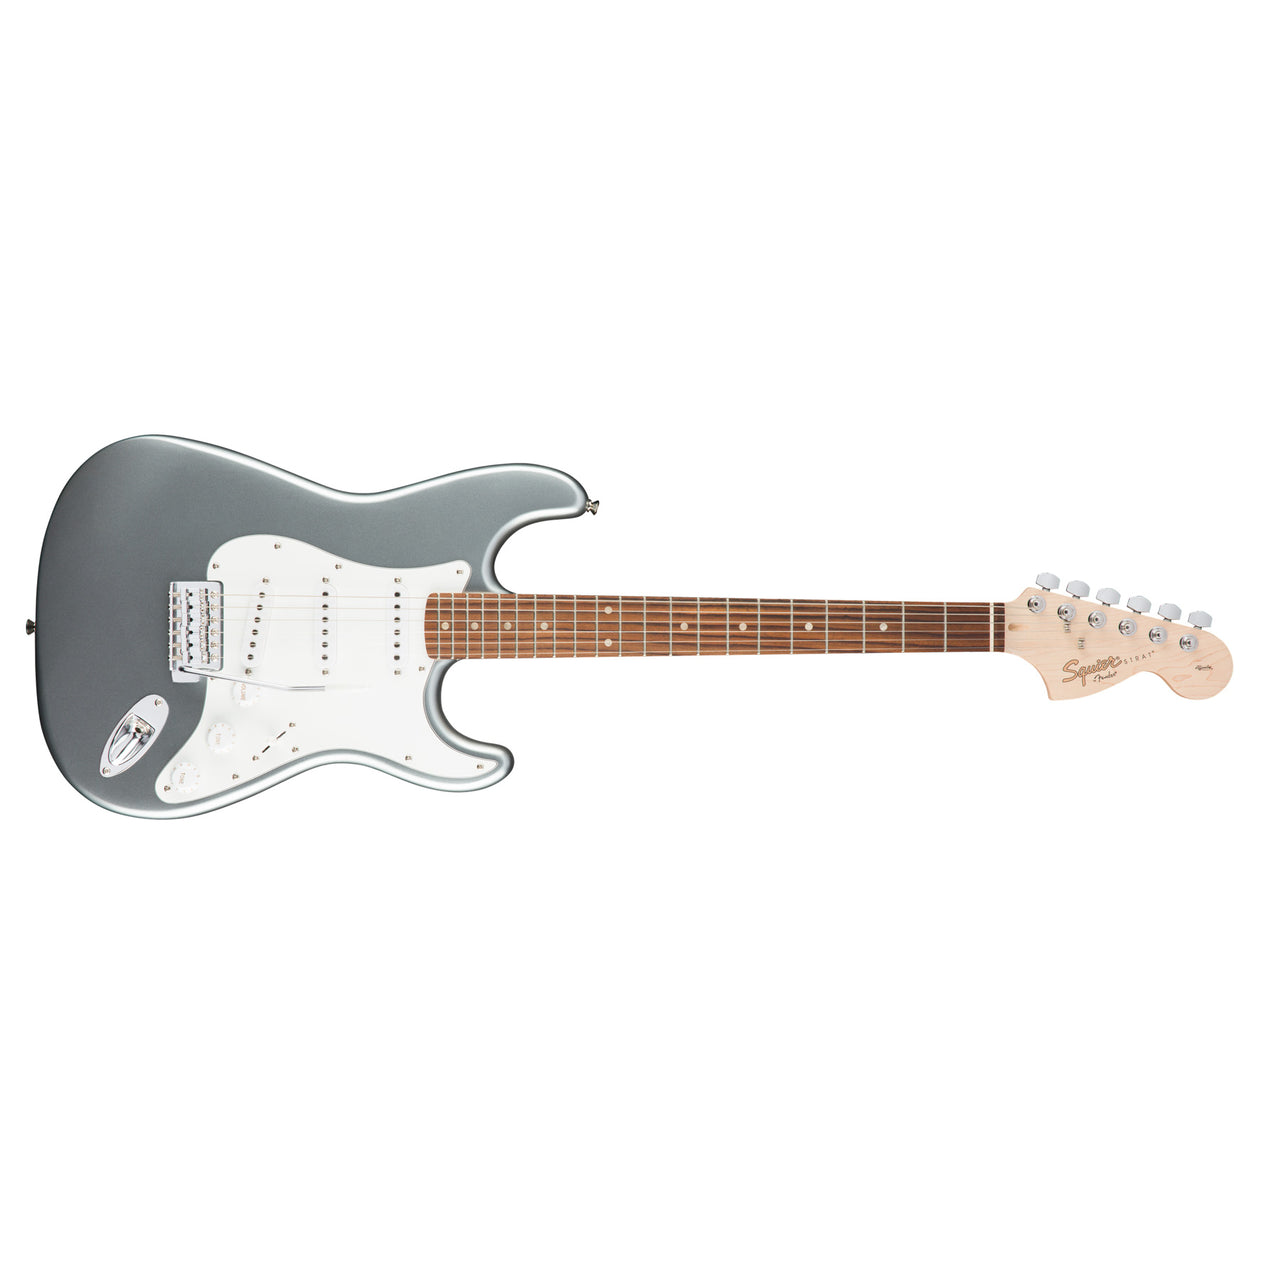 Guitarra Squier by Fender Affinity Series Stratocaster Eléctrica Slick Silver 0370600581